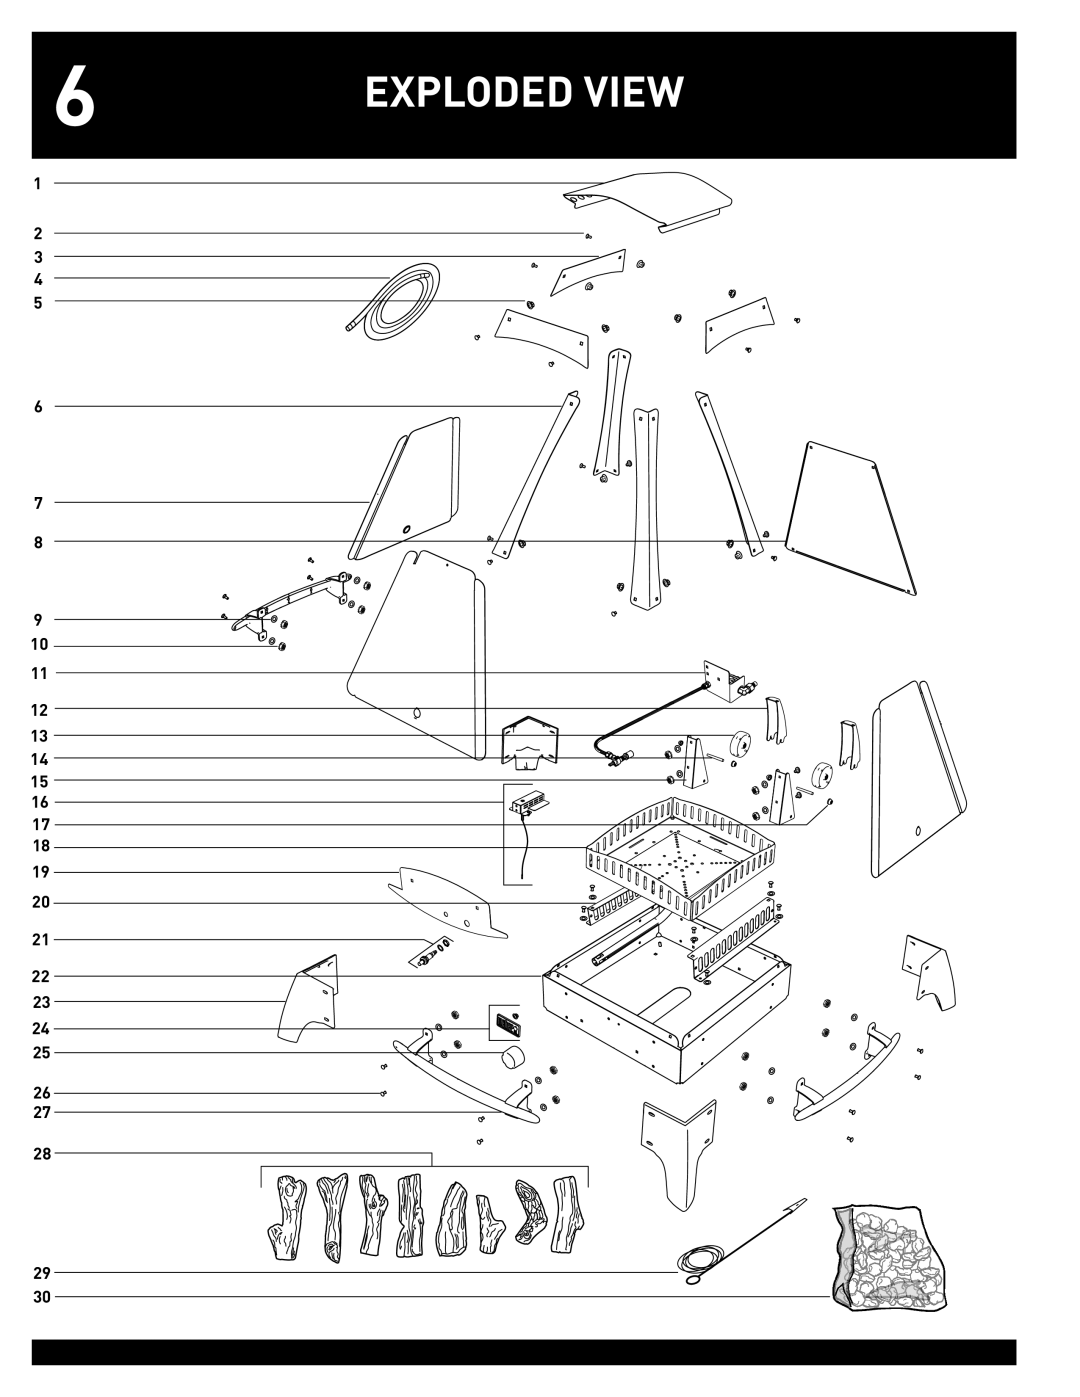 Weber FLAME manual Exploded View, 1 2 3 4 5 6 7 8 9 10 11 12 13 14 15 16, 23 24 